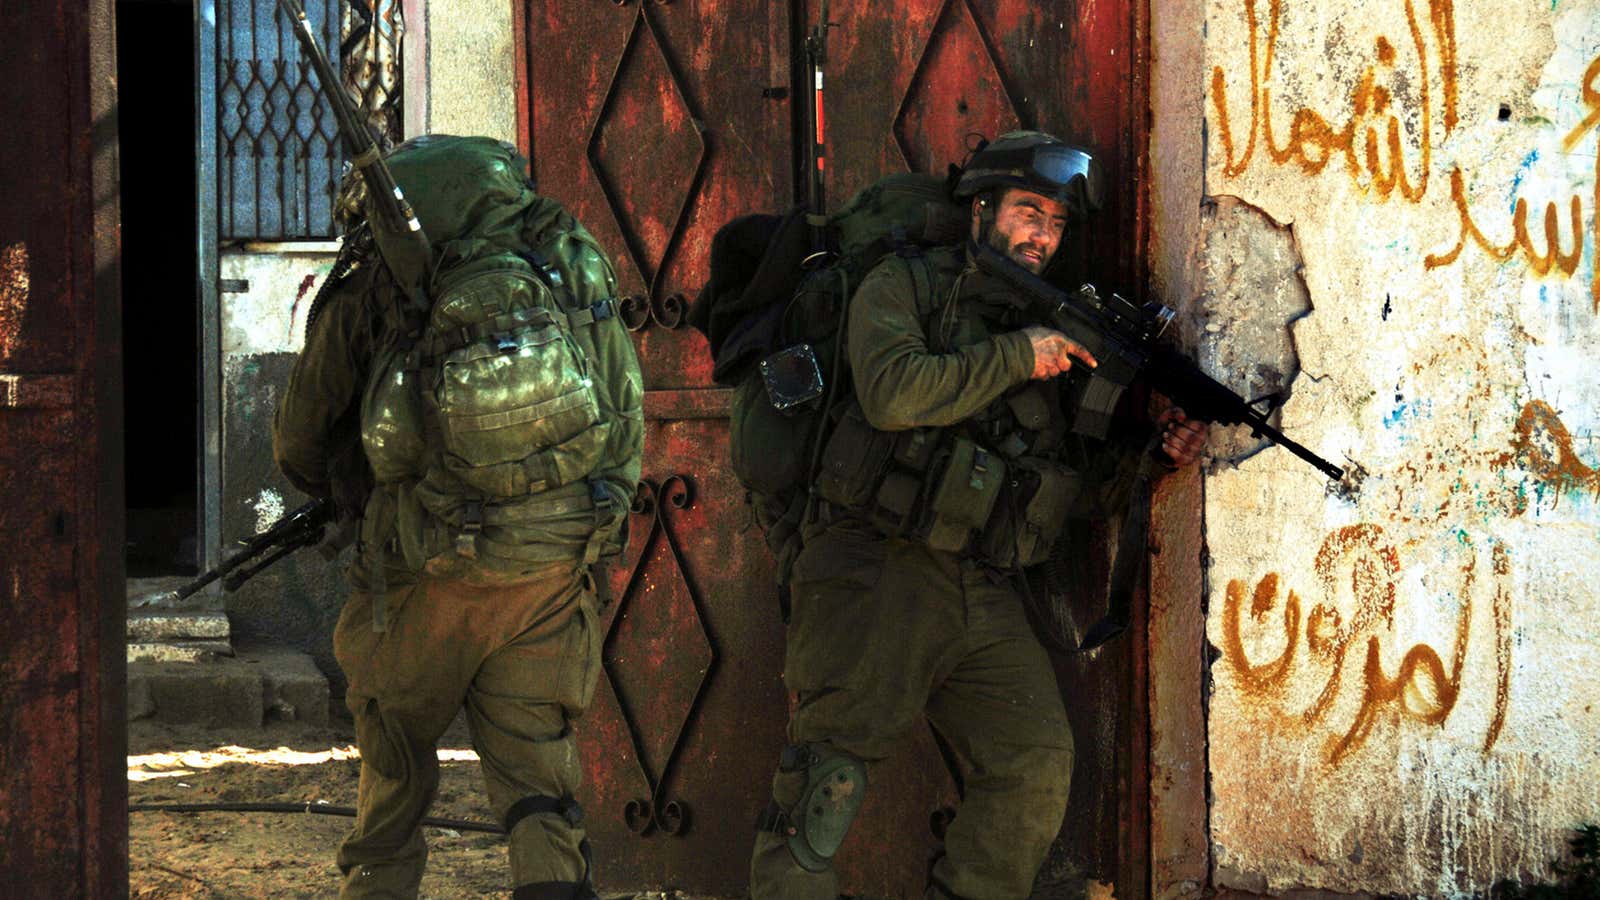 Israeli soldiers in Gaza during the 2009 invasion.